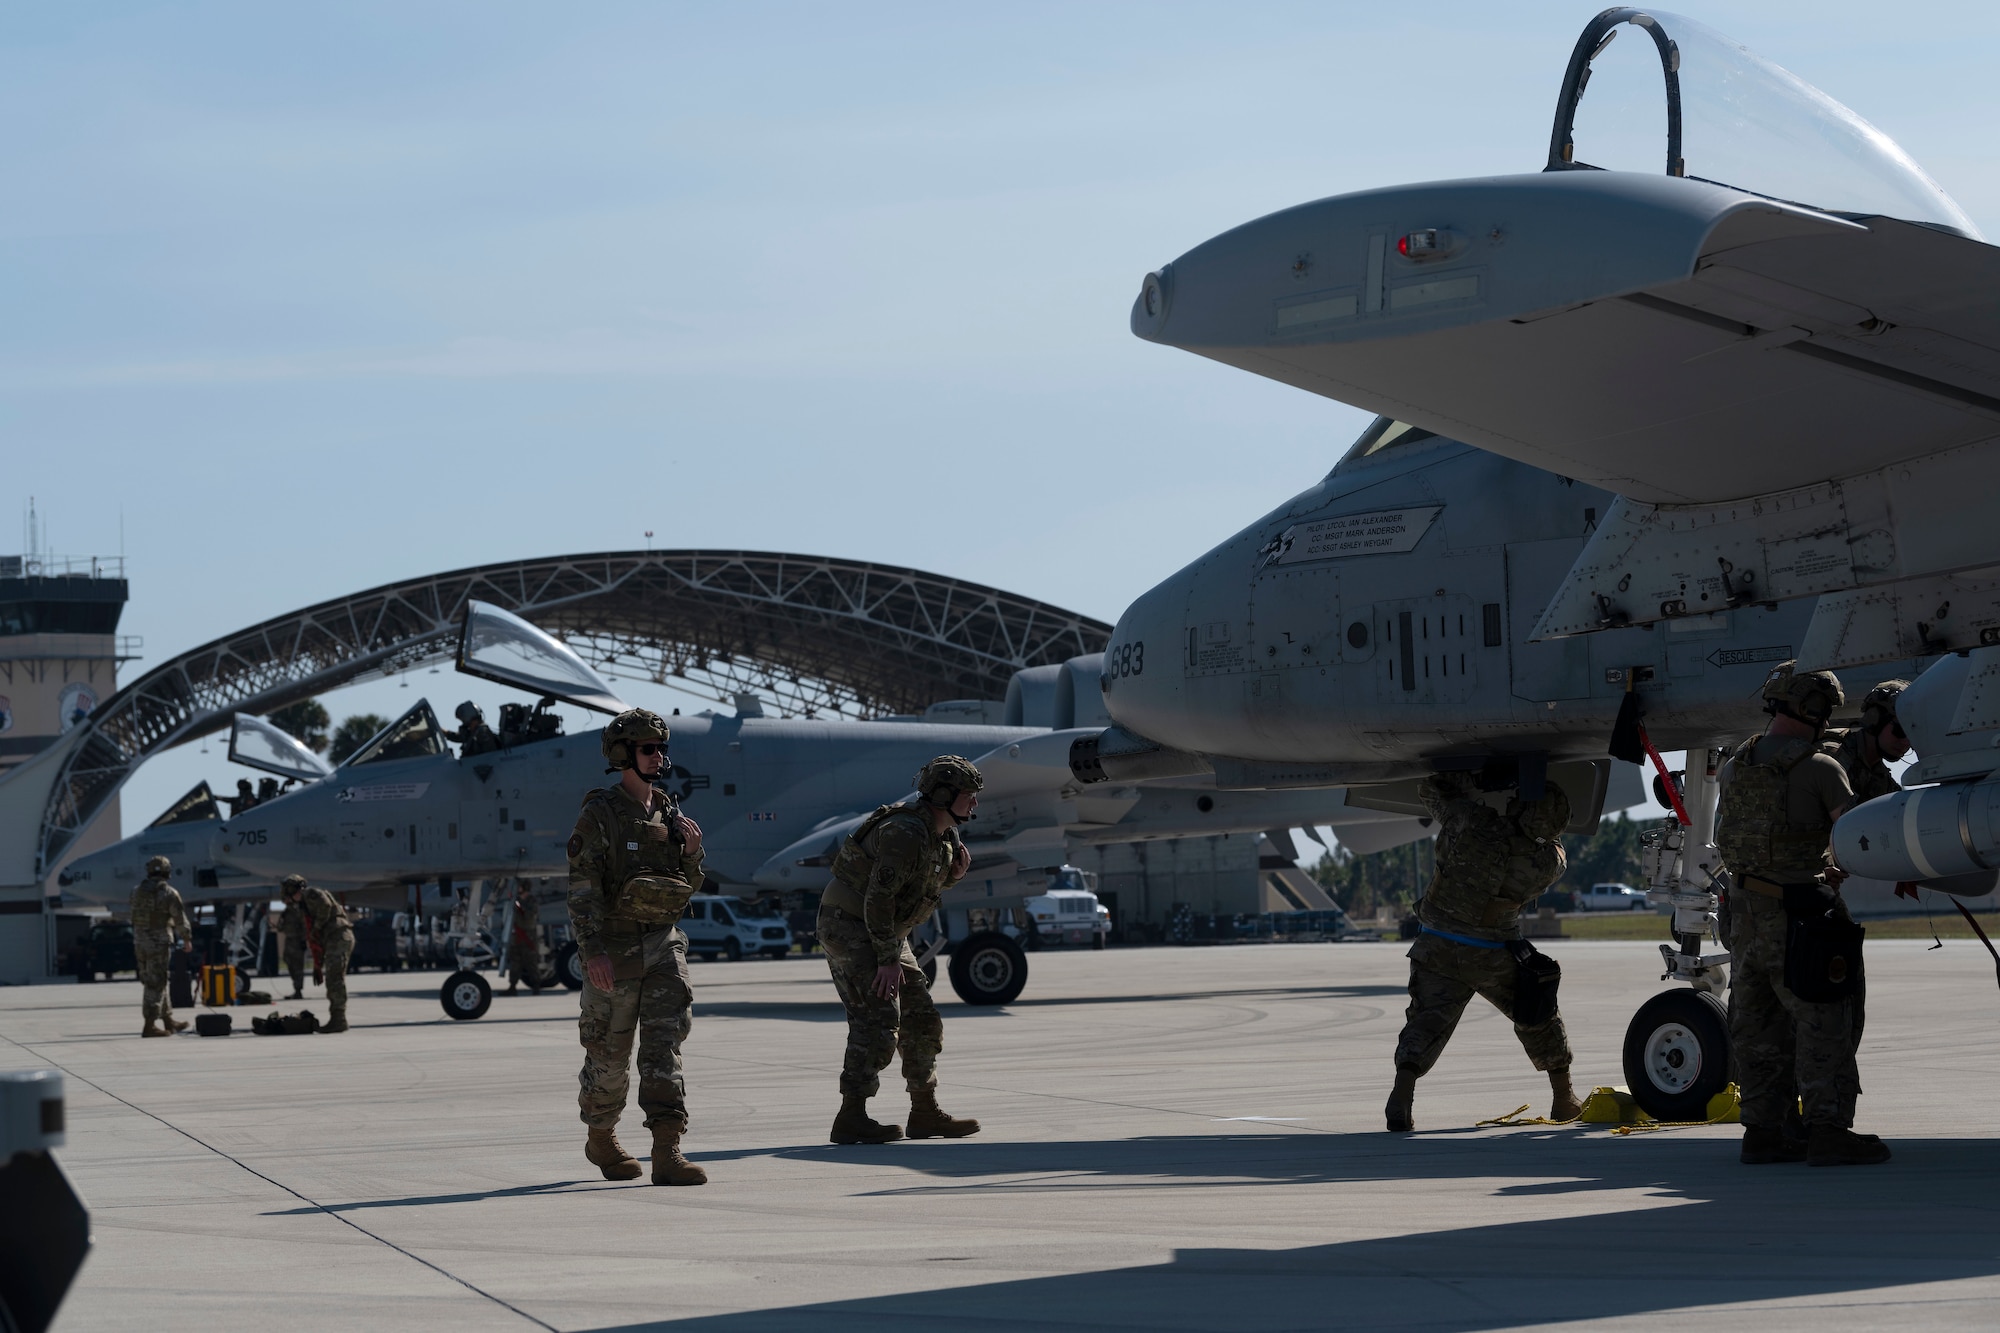 U.S. Airmen assigned to the 127th Wing, Michigan Air National Guard, conduct A-10C Thunderbolt II airfield operations as part of agile combat employment during the Agile Rage exercise, Avon Park, Florida, Feb. 28, 2024. Agile Rage 2024 is a National Guard Bureau (NGB)/A3 led military exercise, hosted at the Air Dominance Center, taking place from February 26 to March 8, 2024 that involves the collaborative efforts of various Air National Guard Wings conducting joint counter-land and combat search and rescue (CSAR) operations in a simulated medium to high threat environment. (U.S. Air National Guard photo by Master Sgt. Rafael D. Rosa)